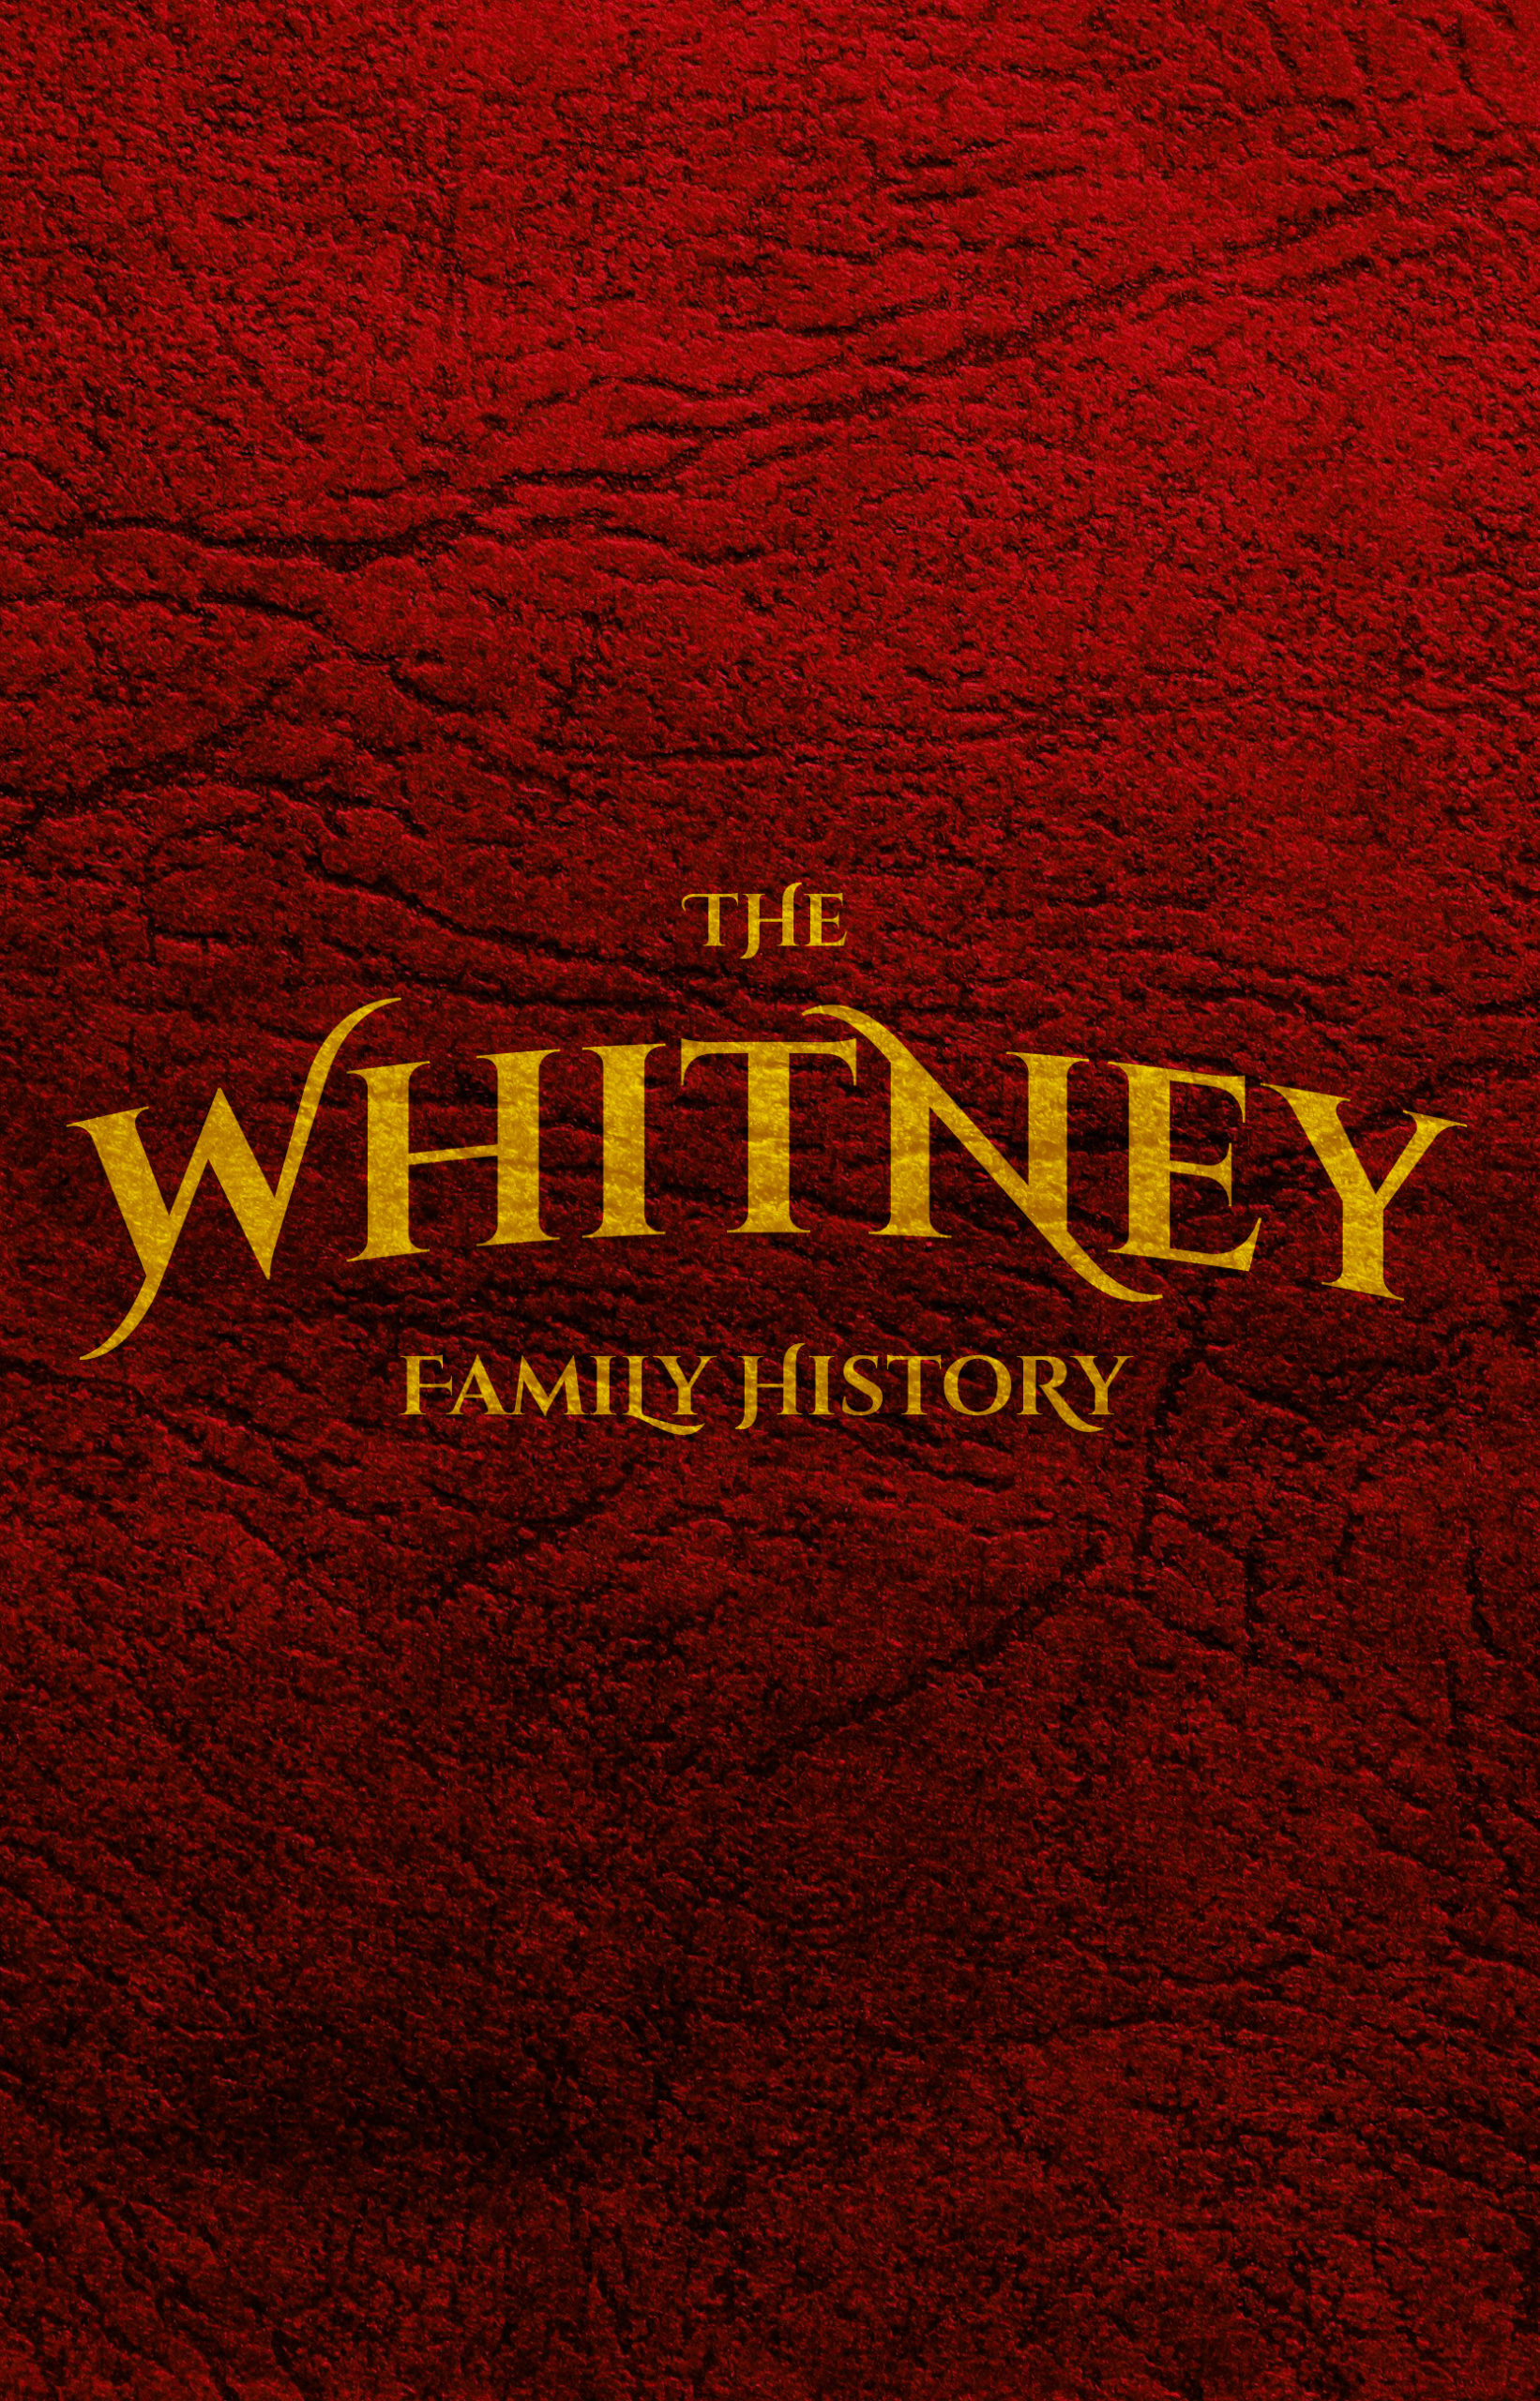 WhitneyCover2